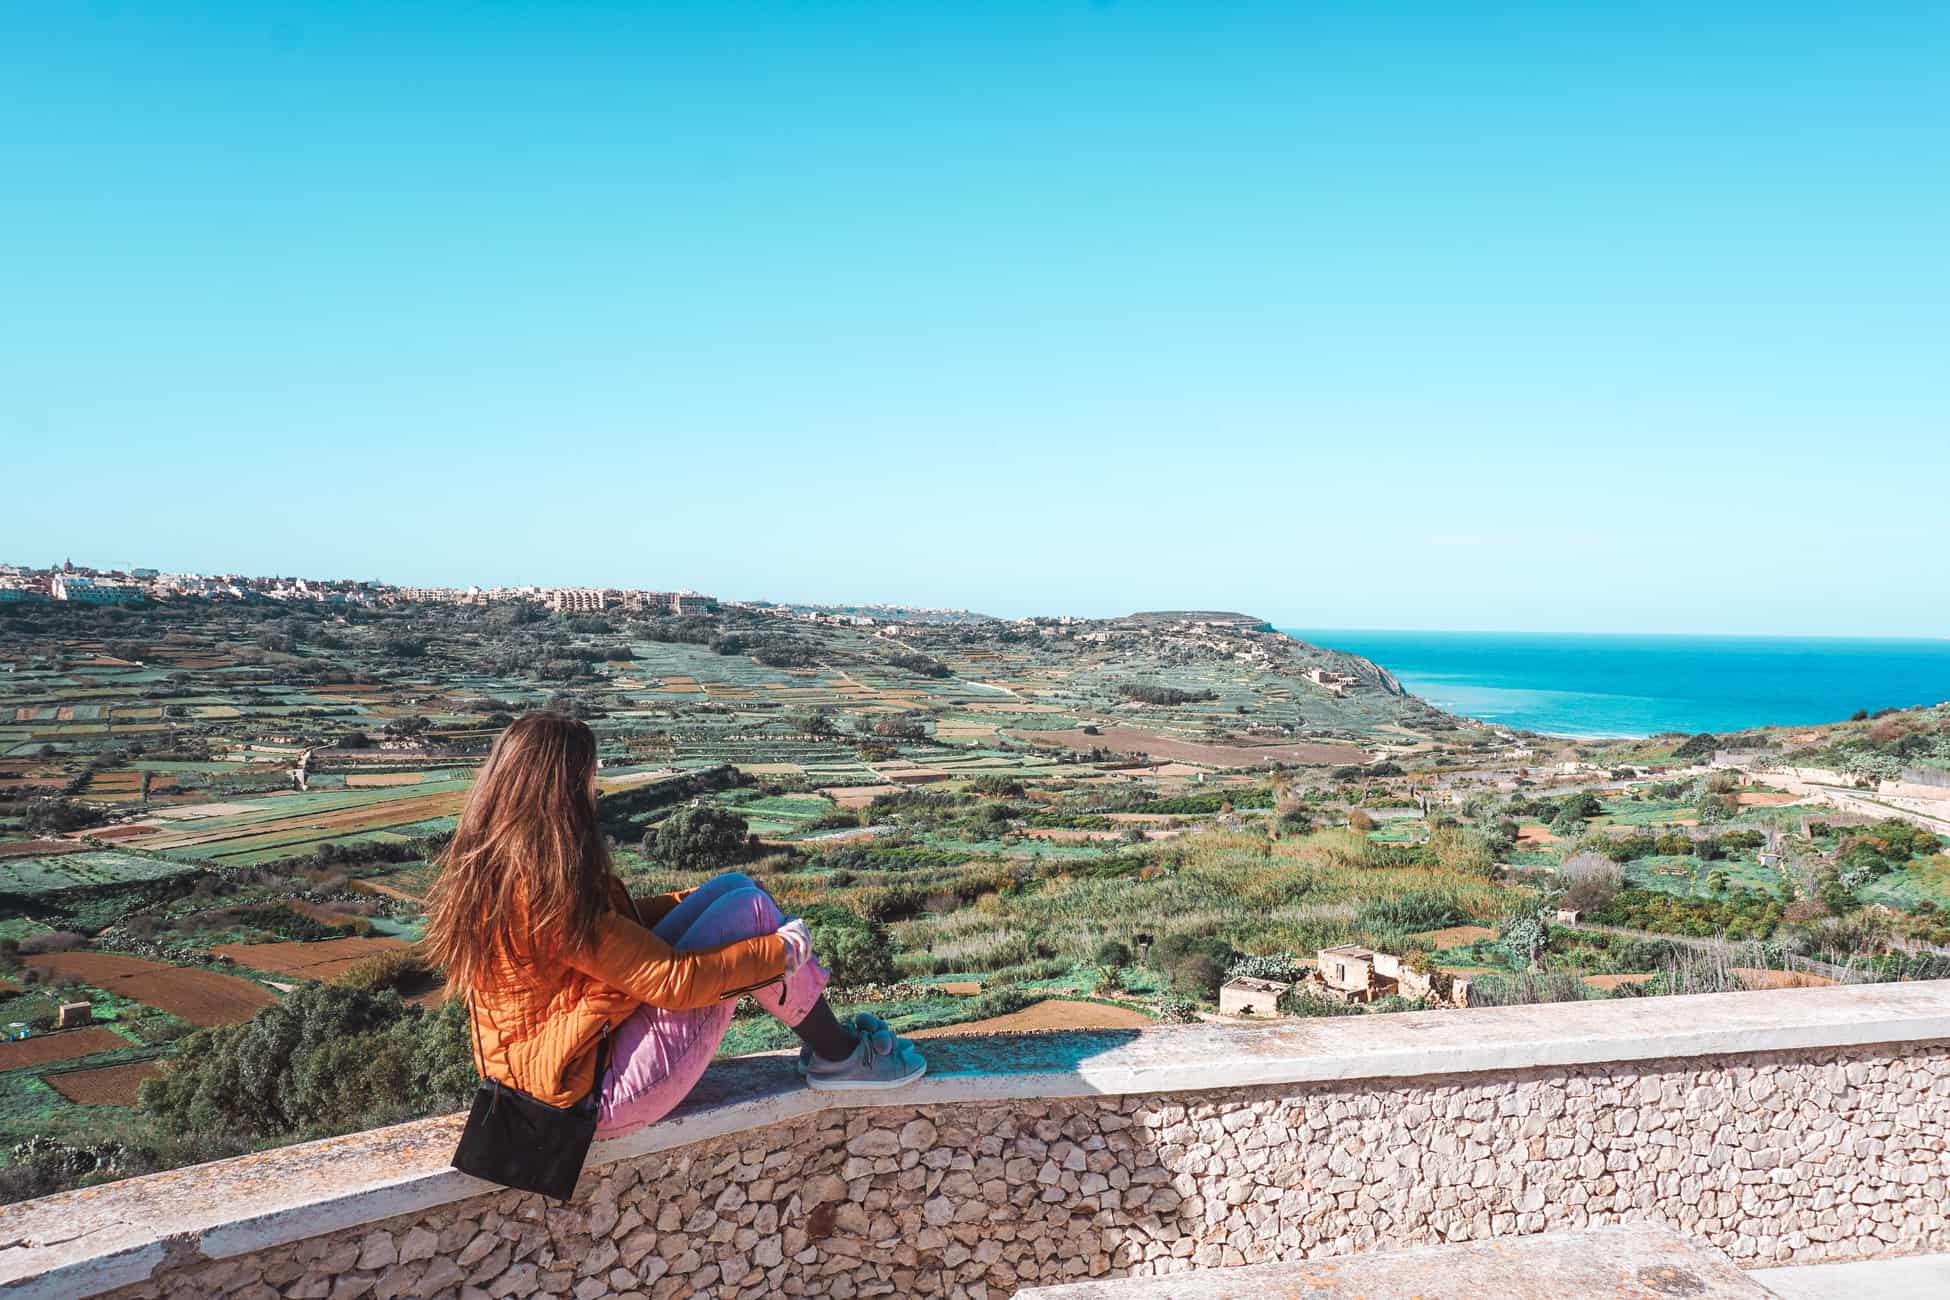 A day trip from Malta to Gozo: things to do in Gozo & the itinerary